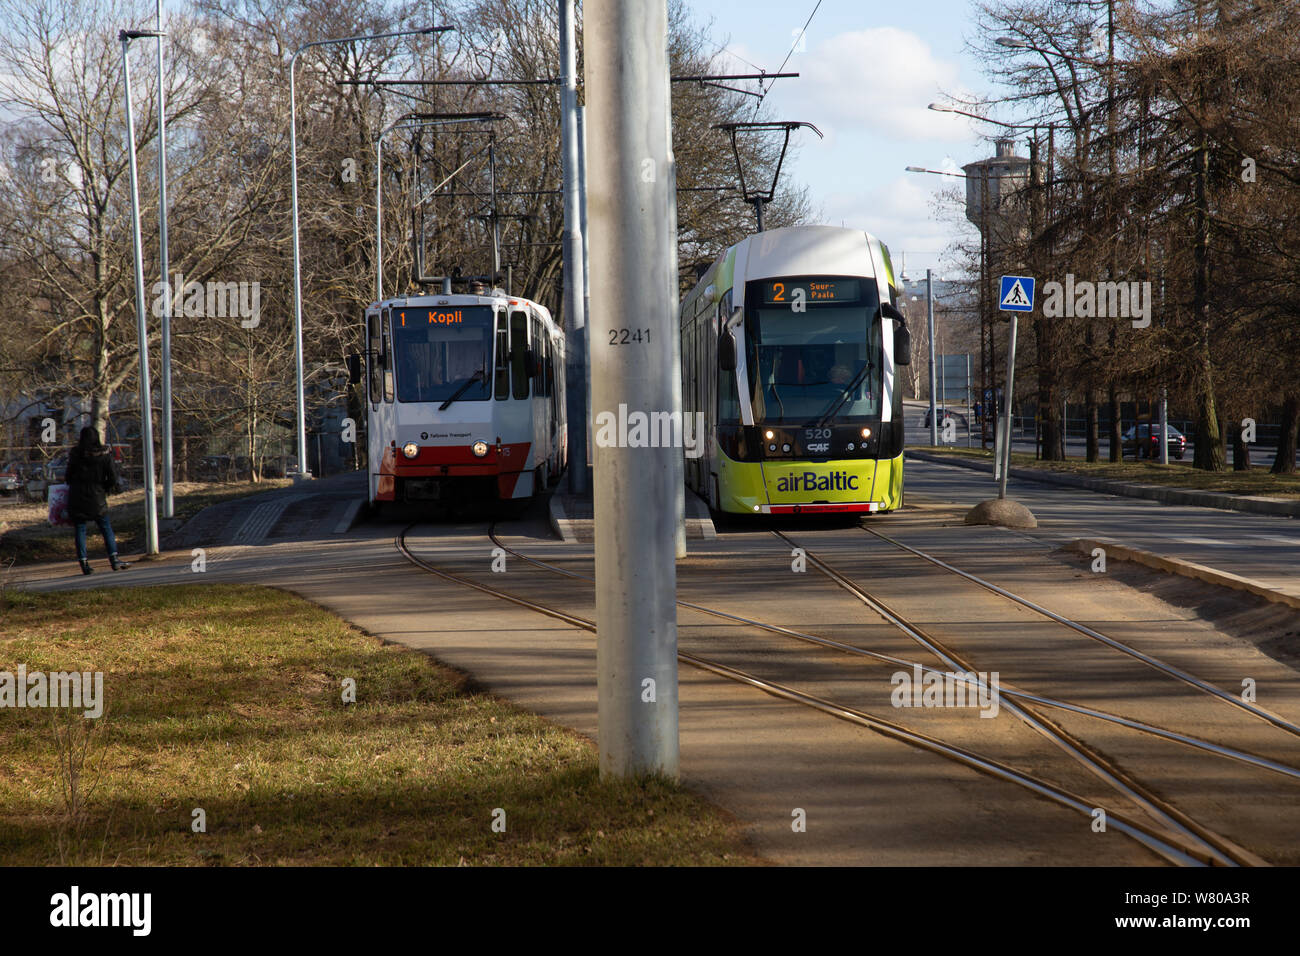 Streetcars in streetcar station Stock Photo